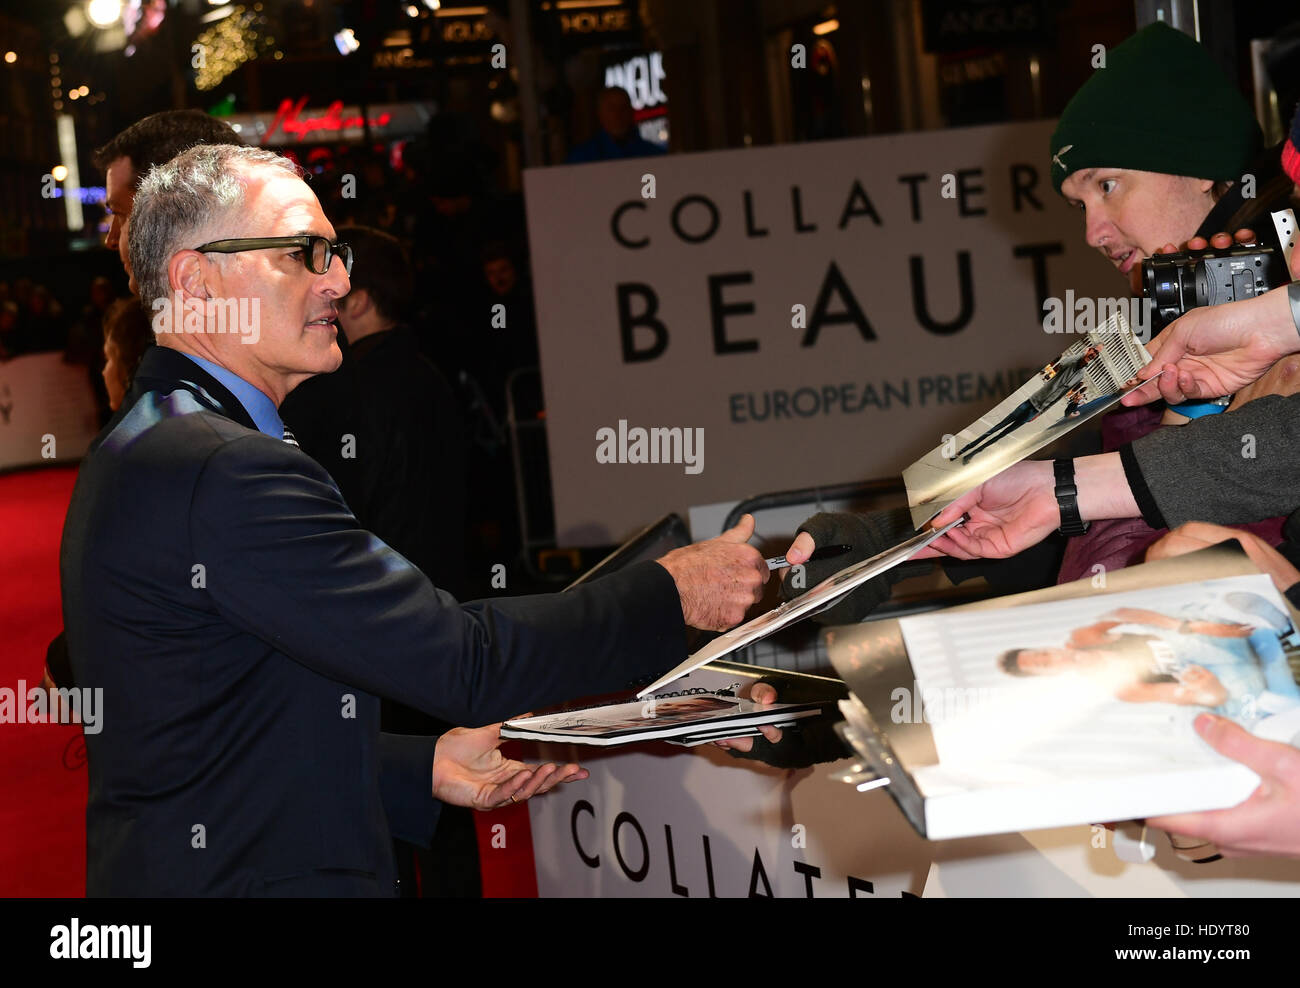 David Frankel attending the European premiere of Collateral Beauty, held at the Vue Leicester Square, London. PRESS ASSOCIATION Photo. Picture date: Monday 15th December, 2016. See PA Story SHOWBIZ Beauty. Photo credit should read: Ian West/PA Wire Stock Photo